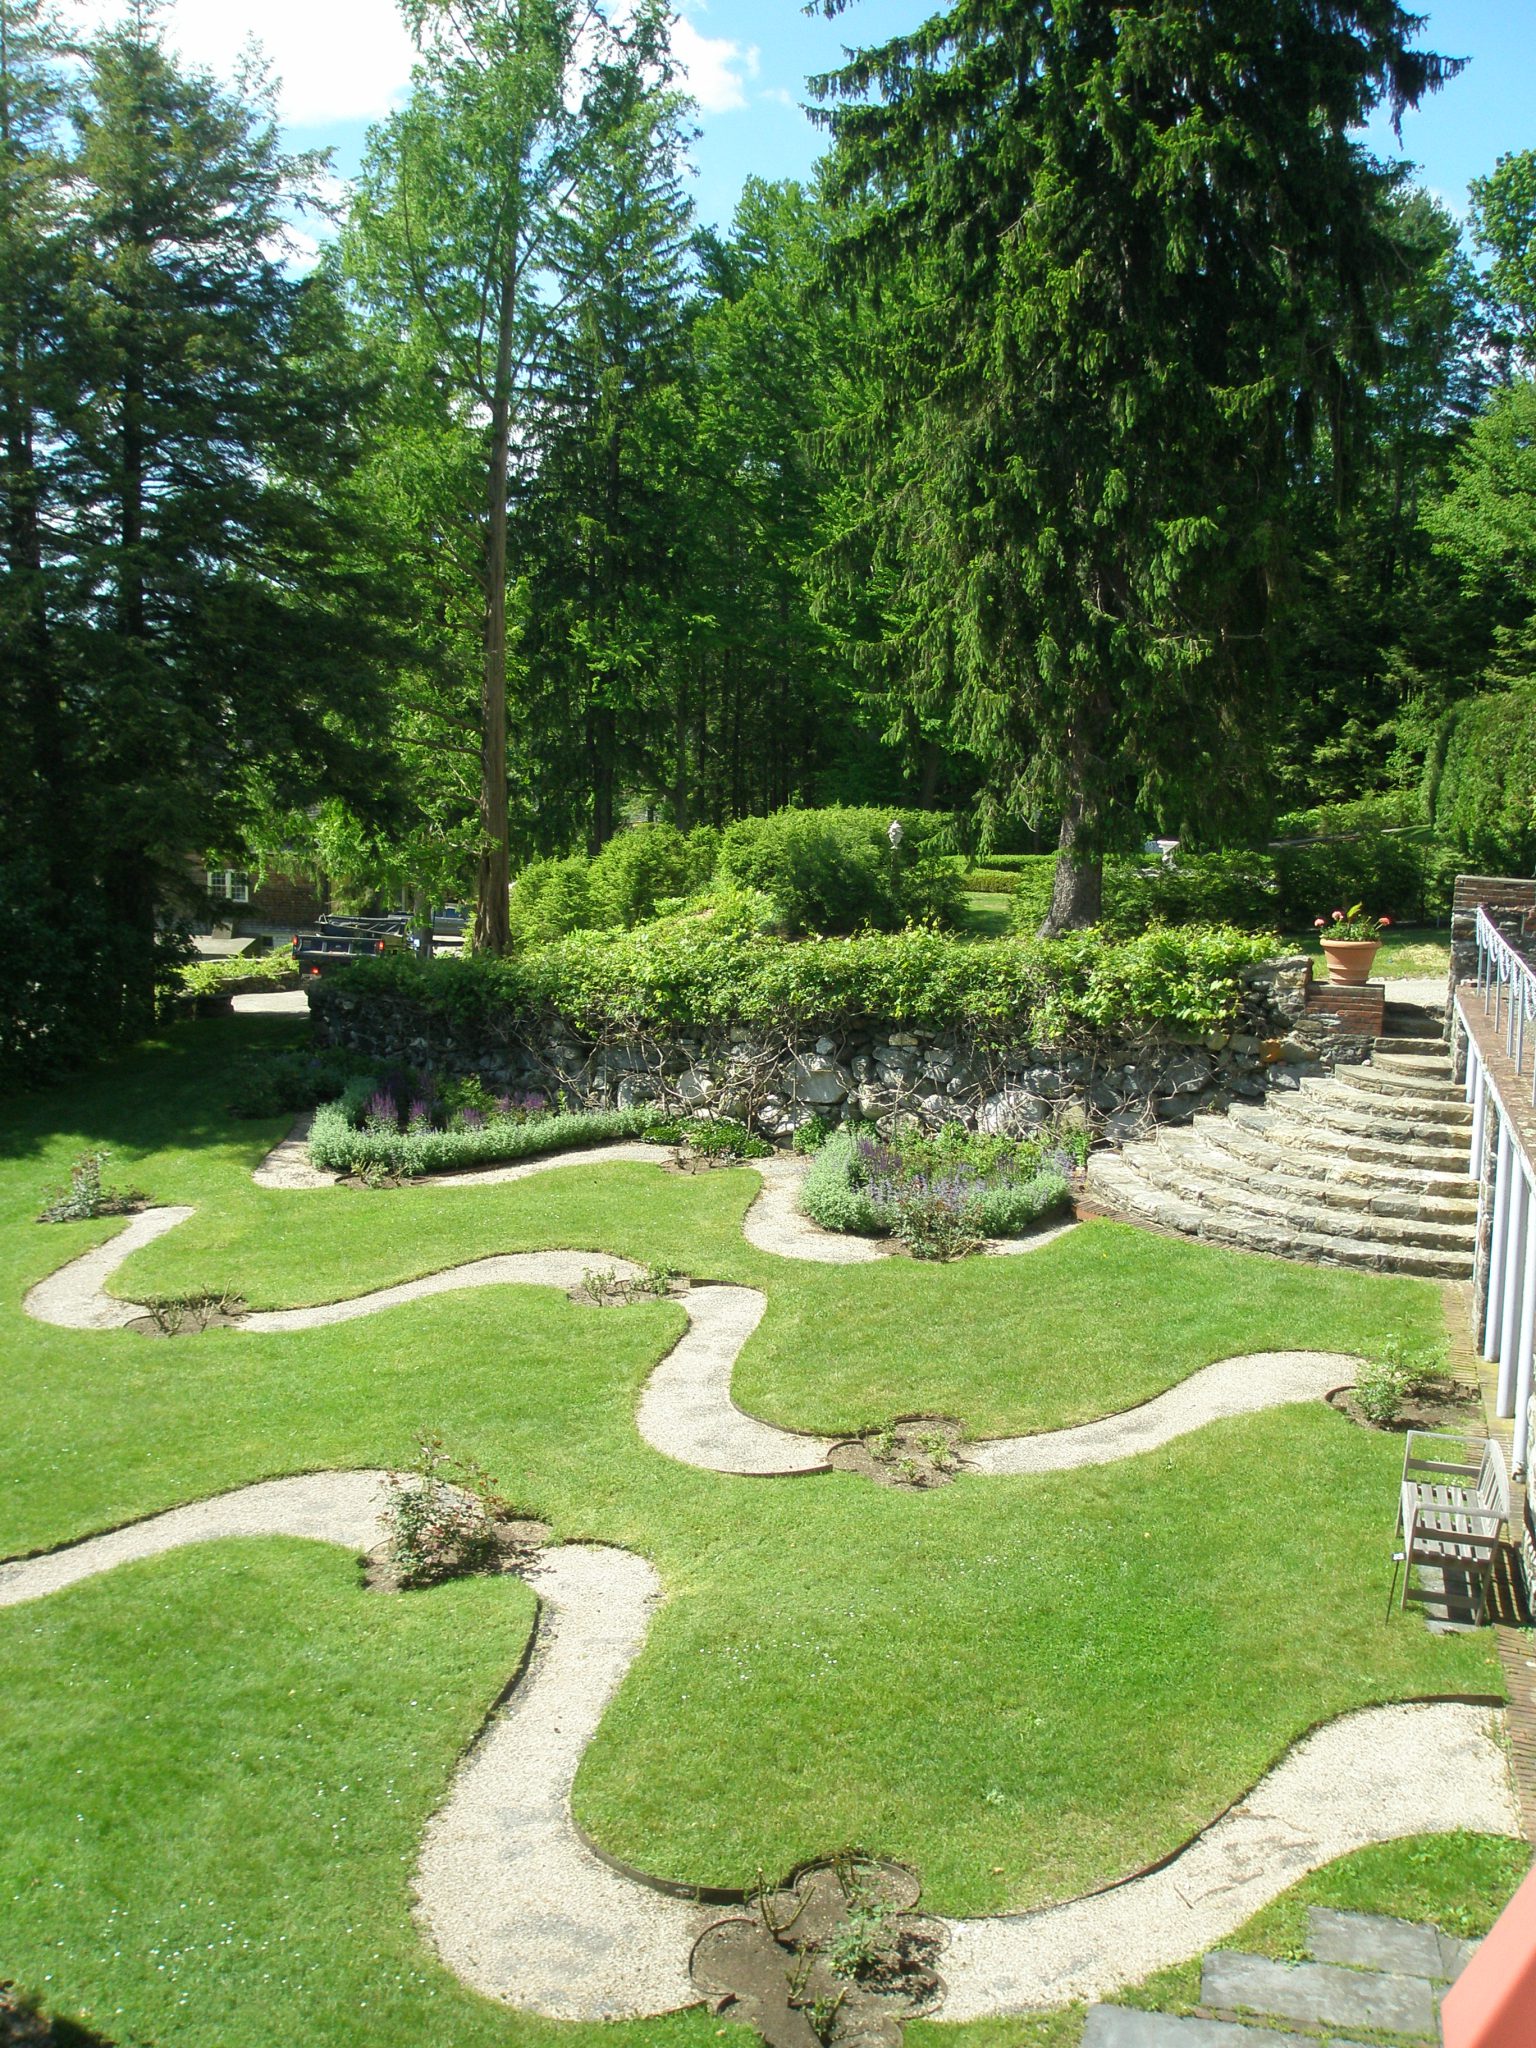 The Rose Garden was designed to be seen from above. Here, the view from the walkway at the lower edge of the Top Lawn.